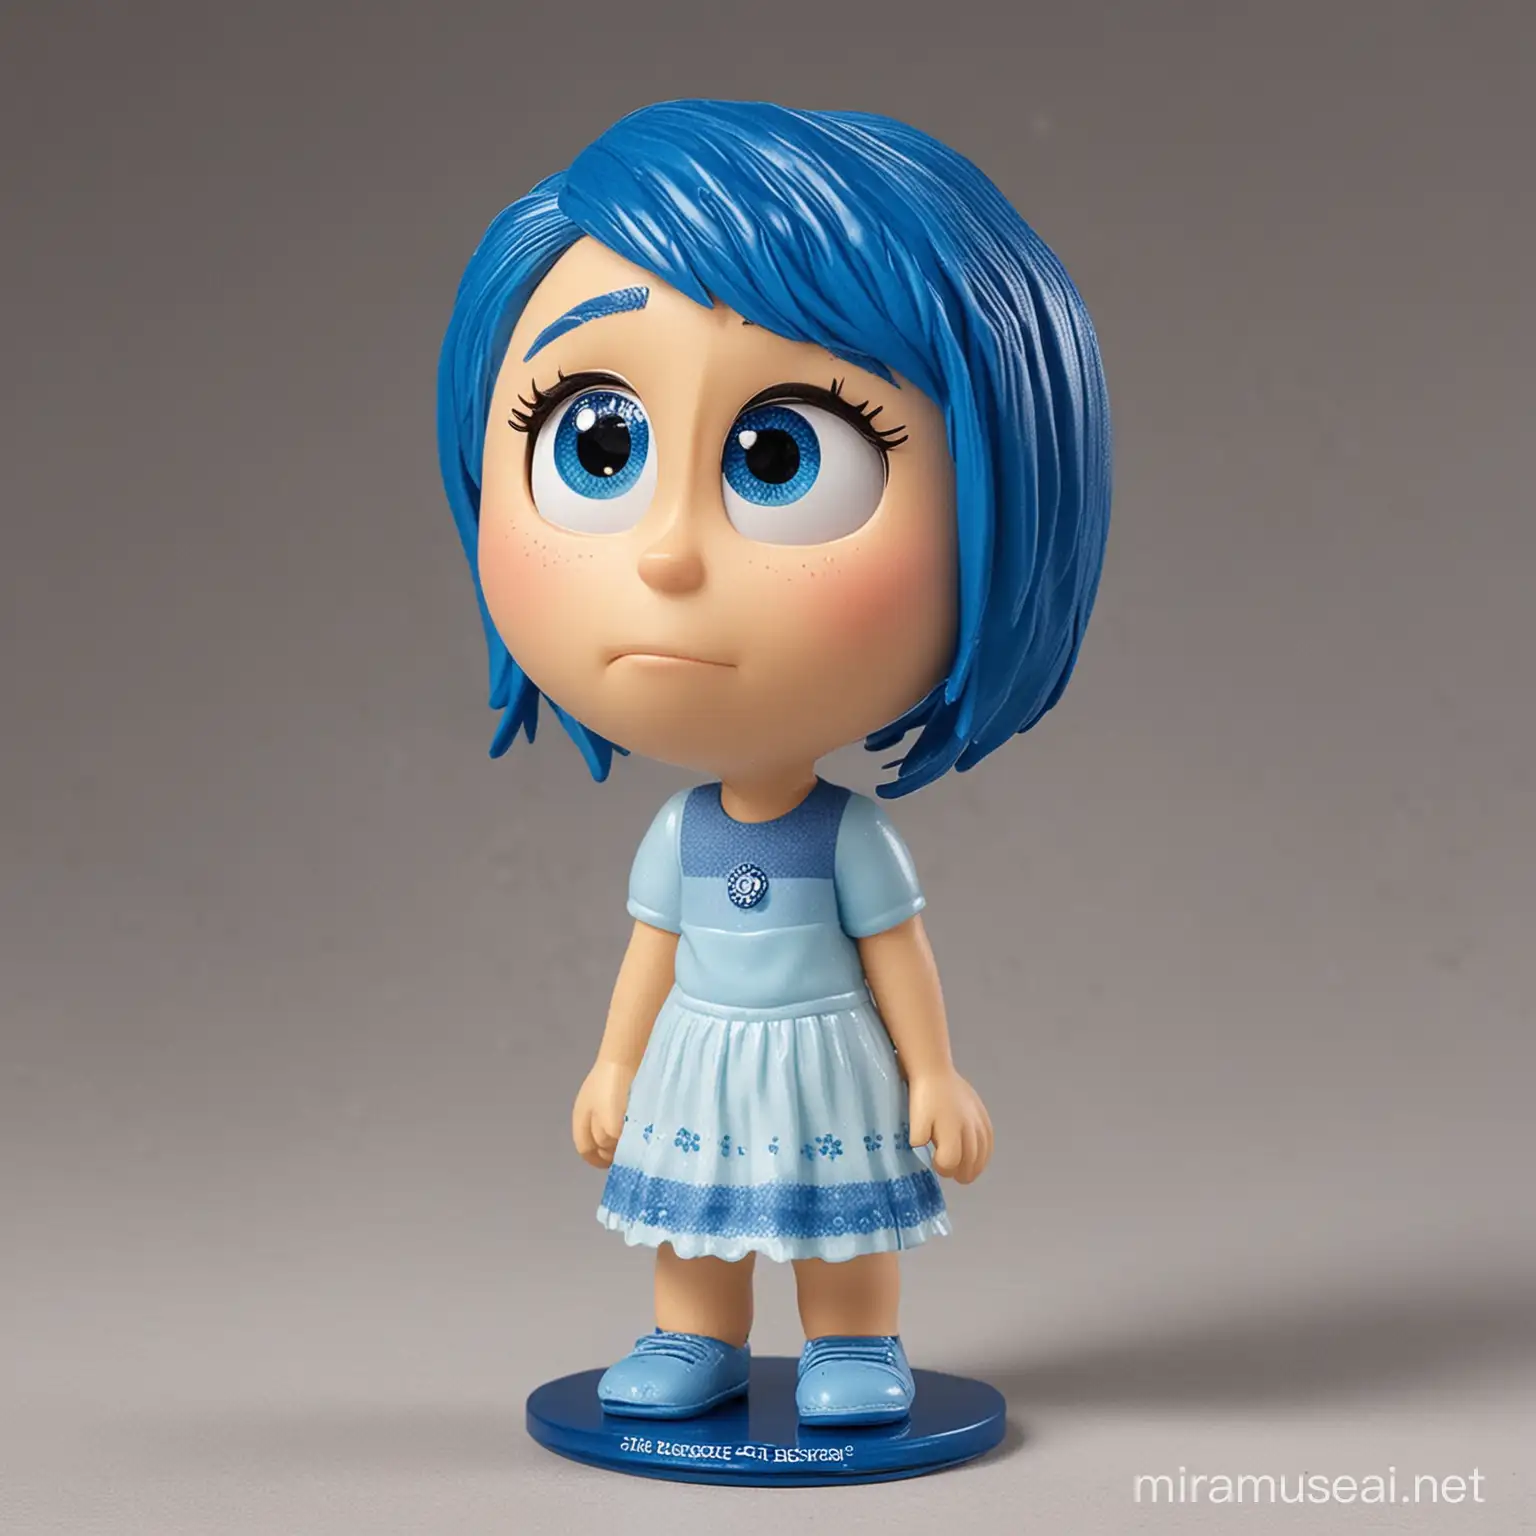 Inside Out Sadness Bobblehead Toy Cute and Collectible Pixar Character Figurine